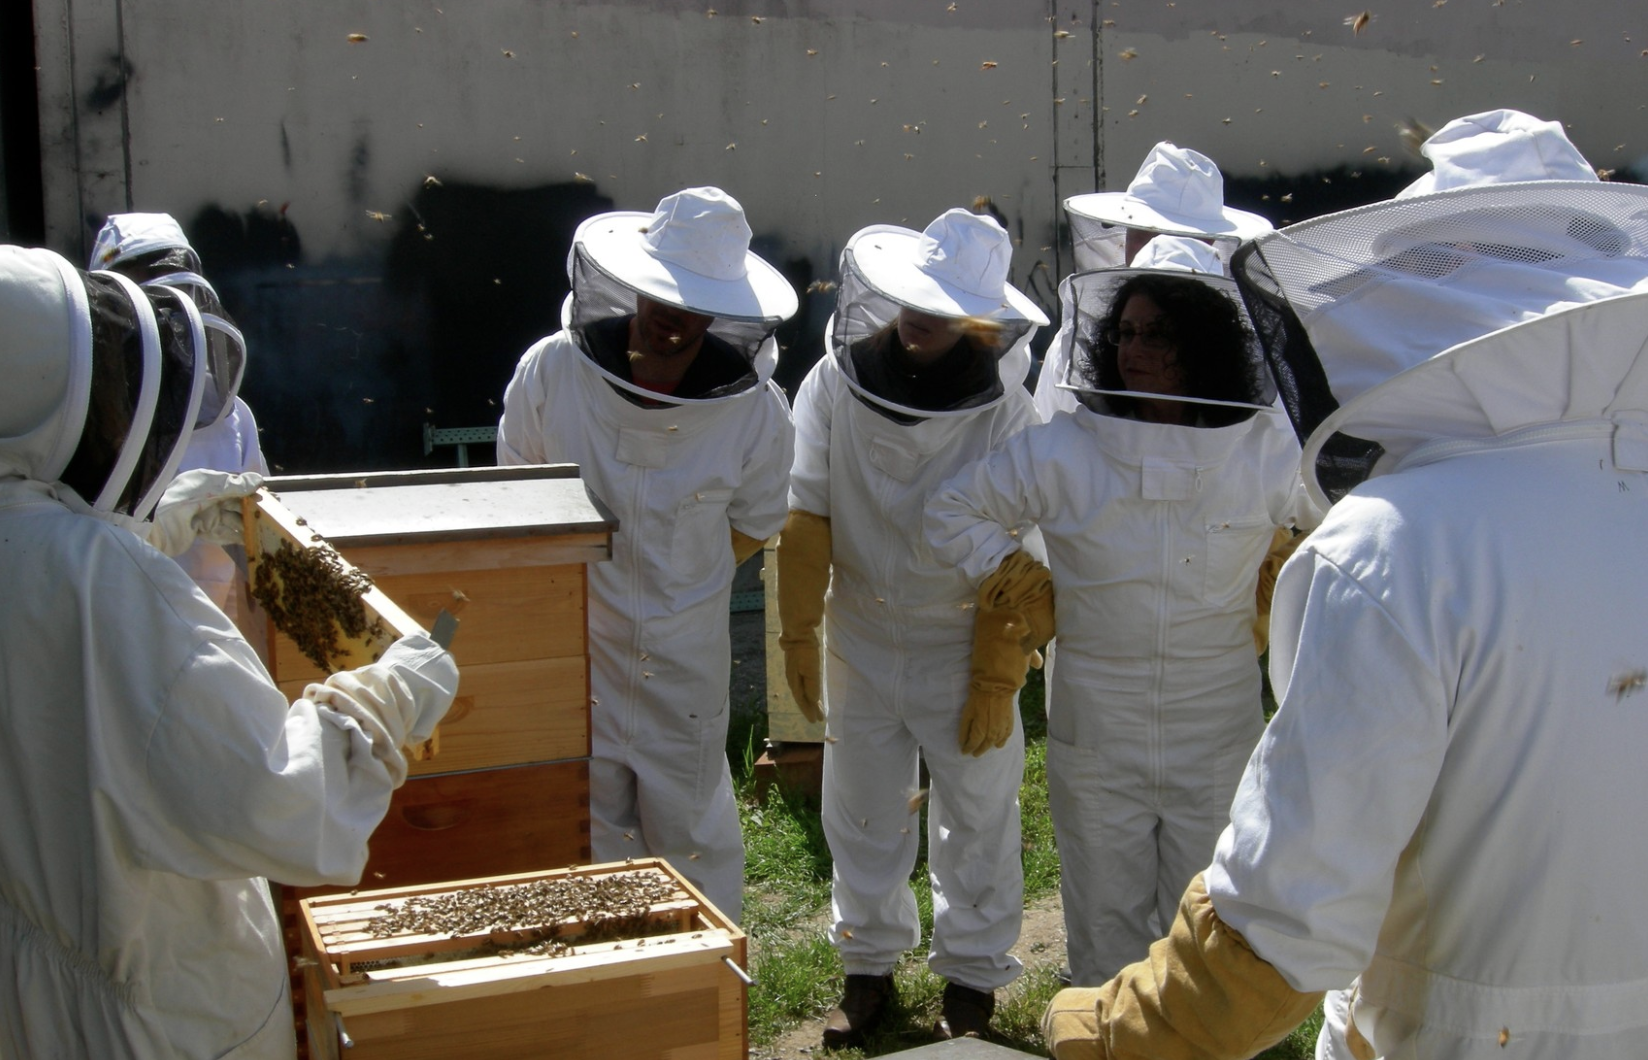 A group of people in beekeeping suits gather around a hive, as one beekeeper holds up part of a hive.